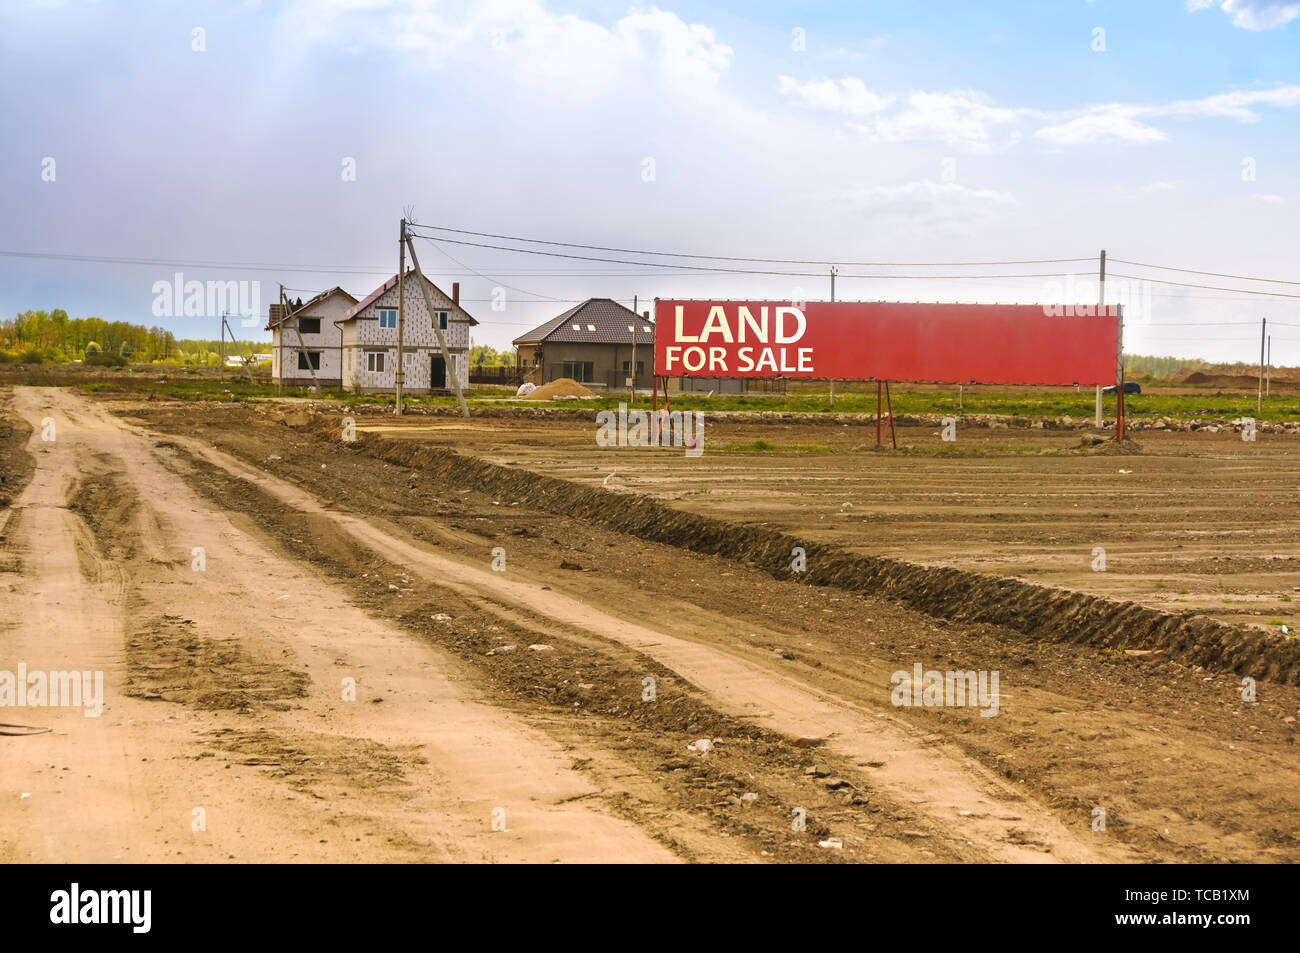 Kaliningrad region, Russia, May 4, 2019. Land for sale, Suburban areas for construction. Stock Photo